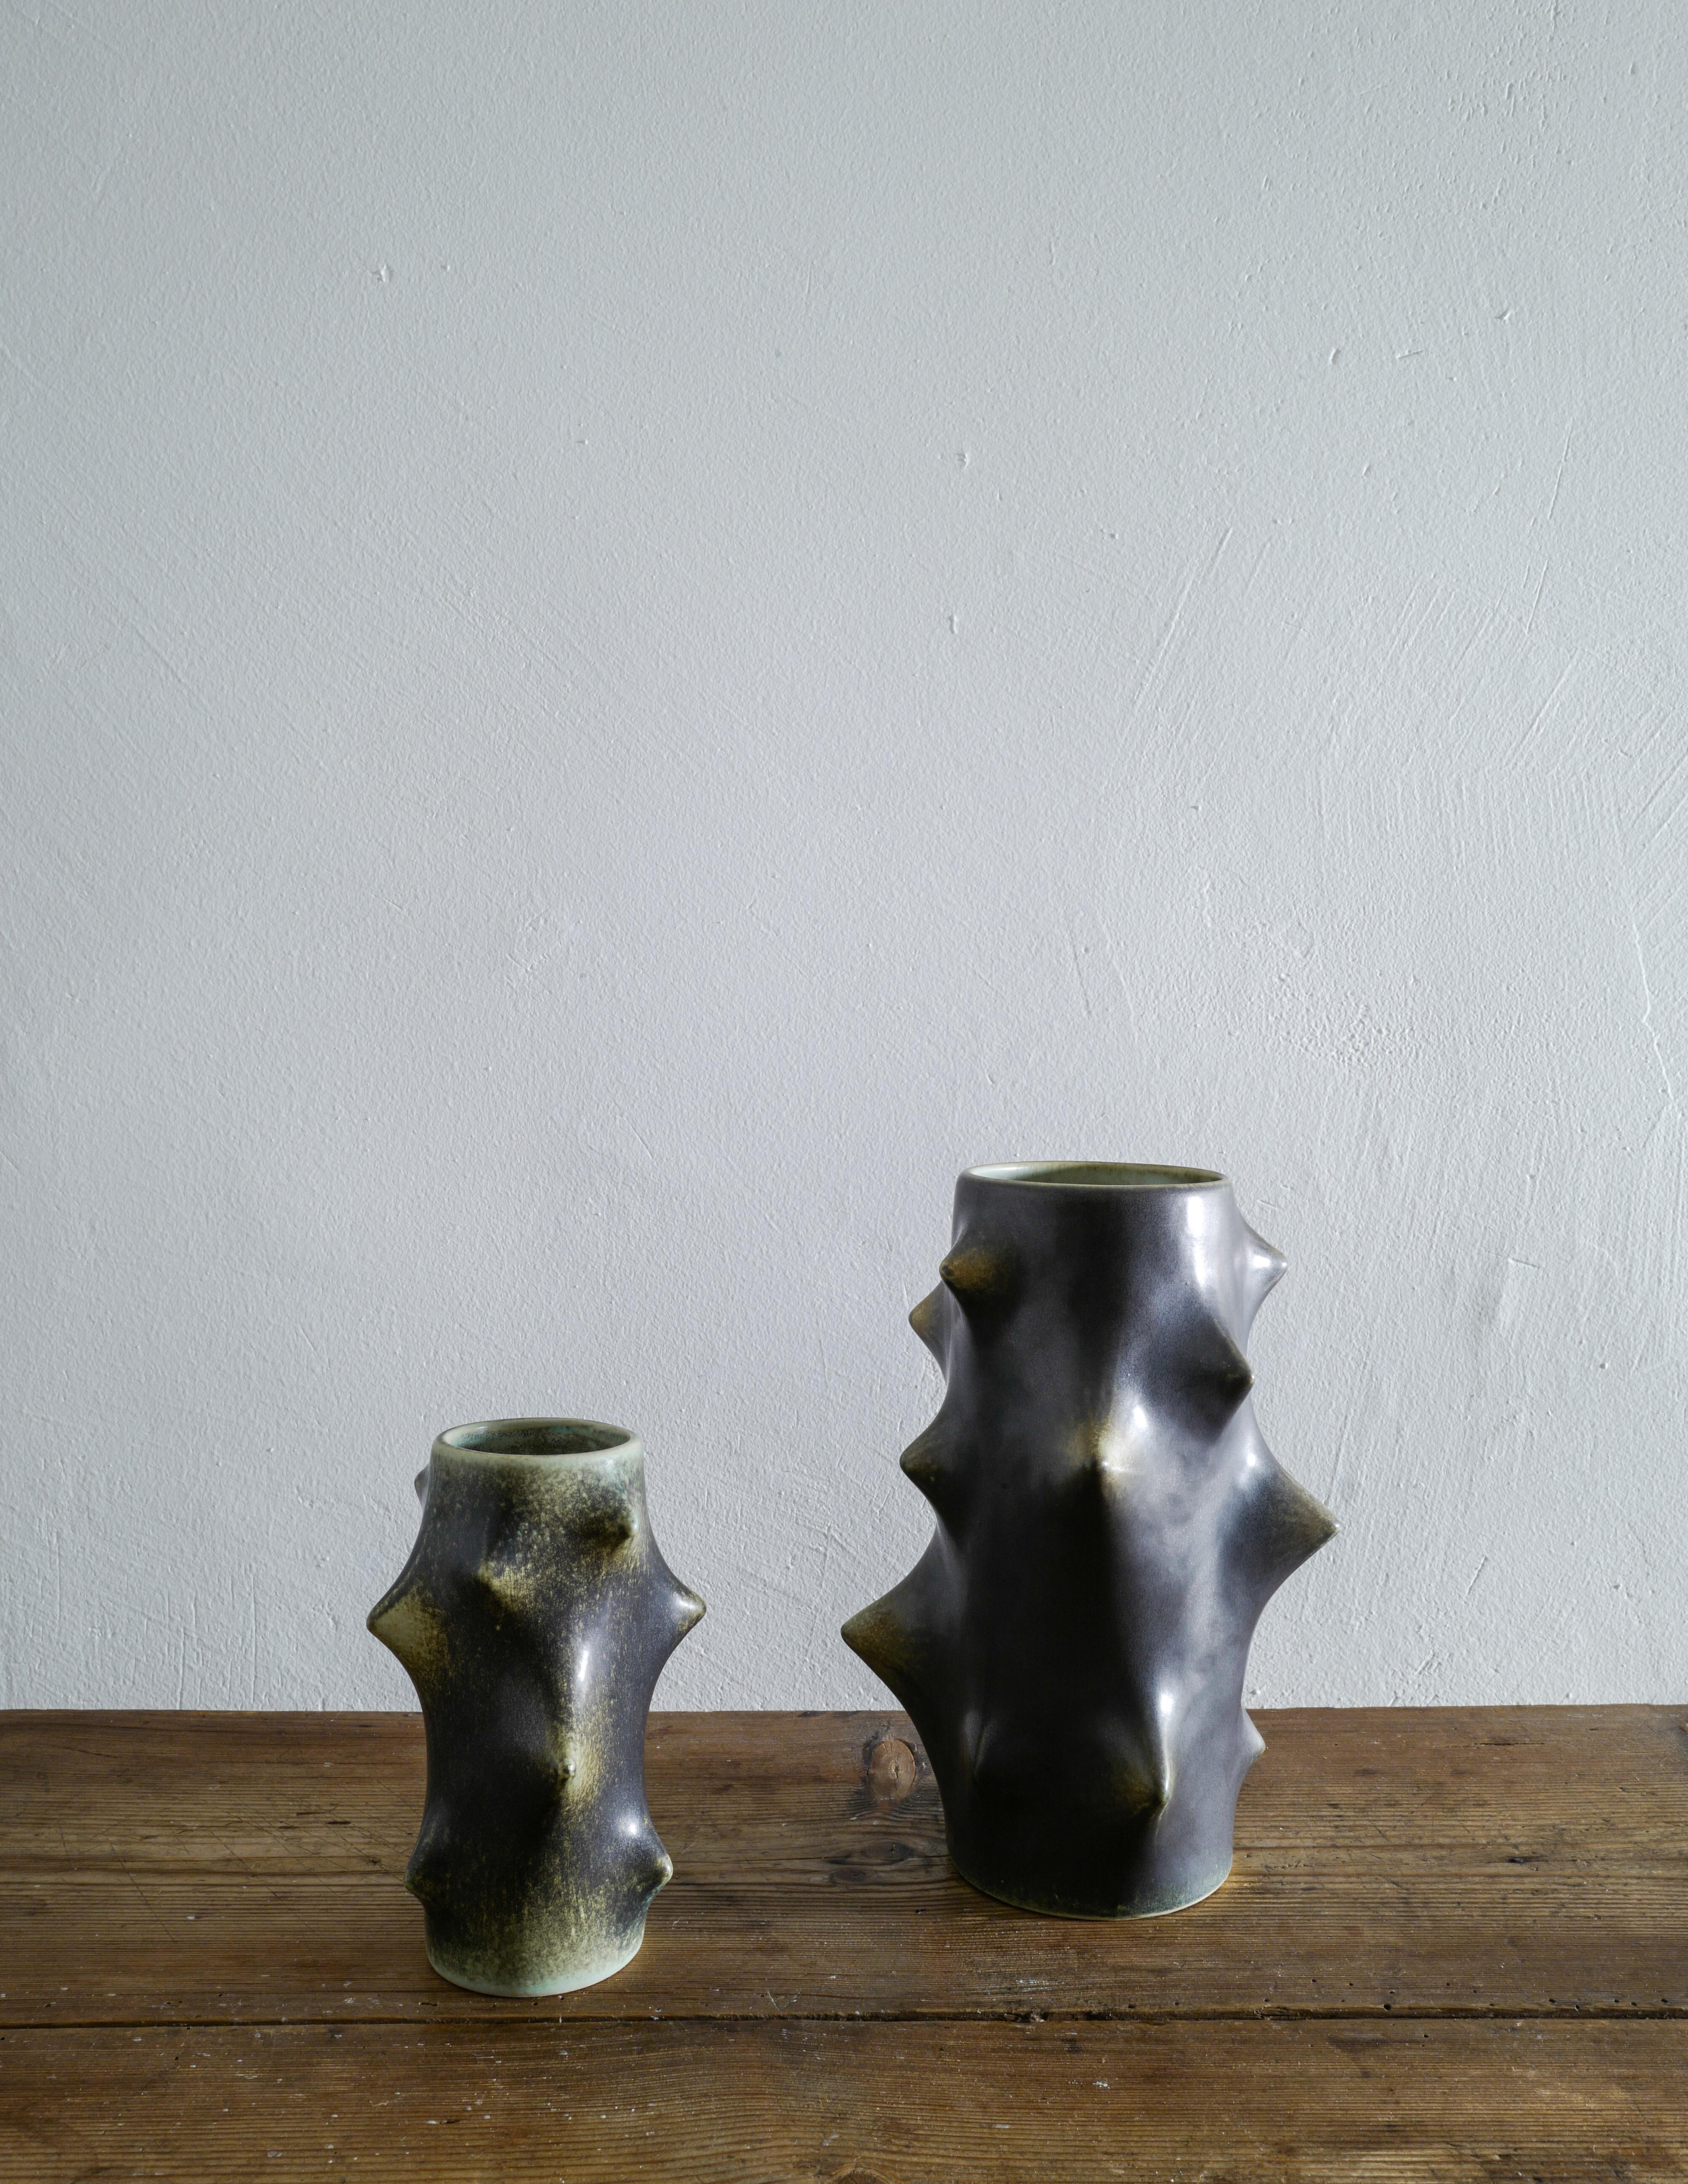 Rare pair of thorn vases in dark green glaze designed by Knud Basse and produced by Michael Andersen, Denmark. Both vases are in good vintage condition with small signs from use and signed / marked at the bottom. 

Measurements: 
Large: H: 25,5